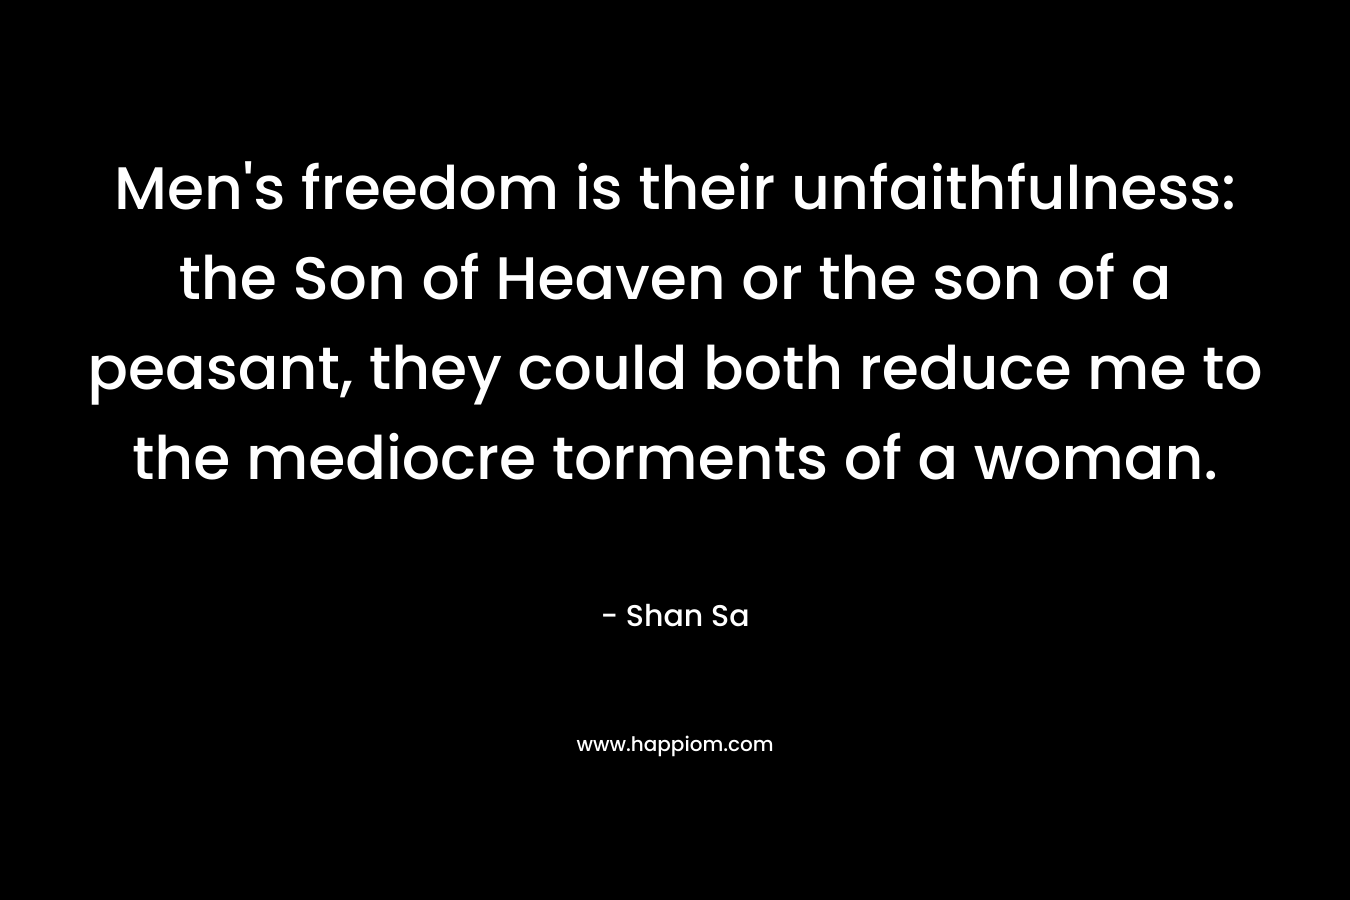 Men's freedom is their unfaithfulness: the Son of Heaven or the son of a peasant, they could both reduce me to the mediocre torments of a woman.